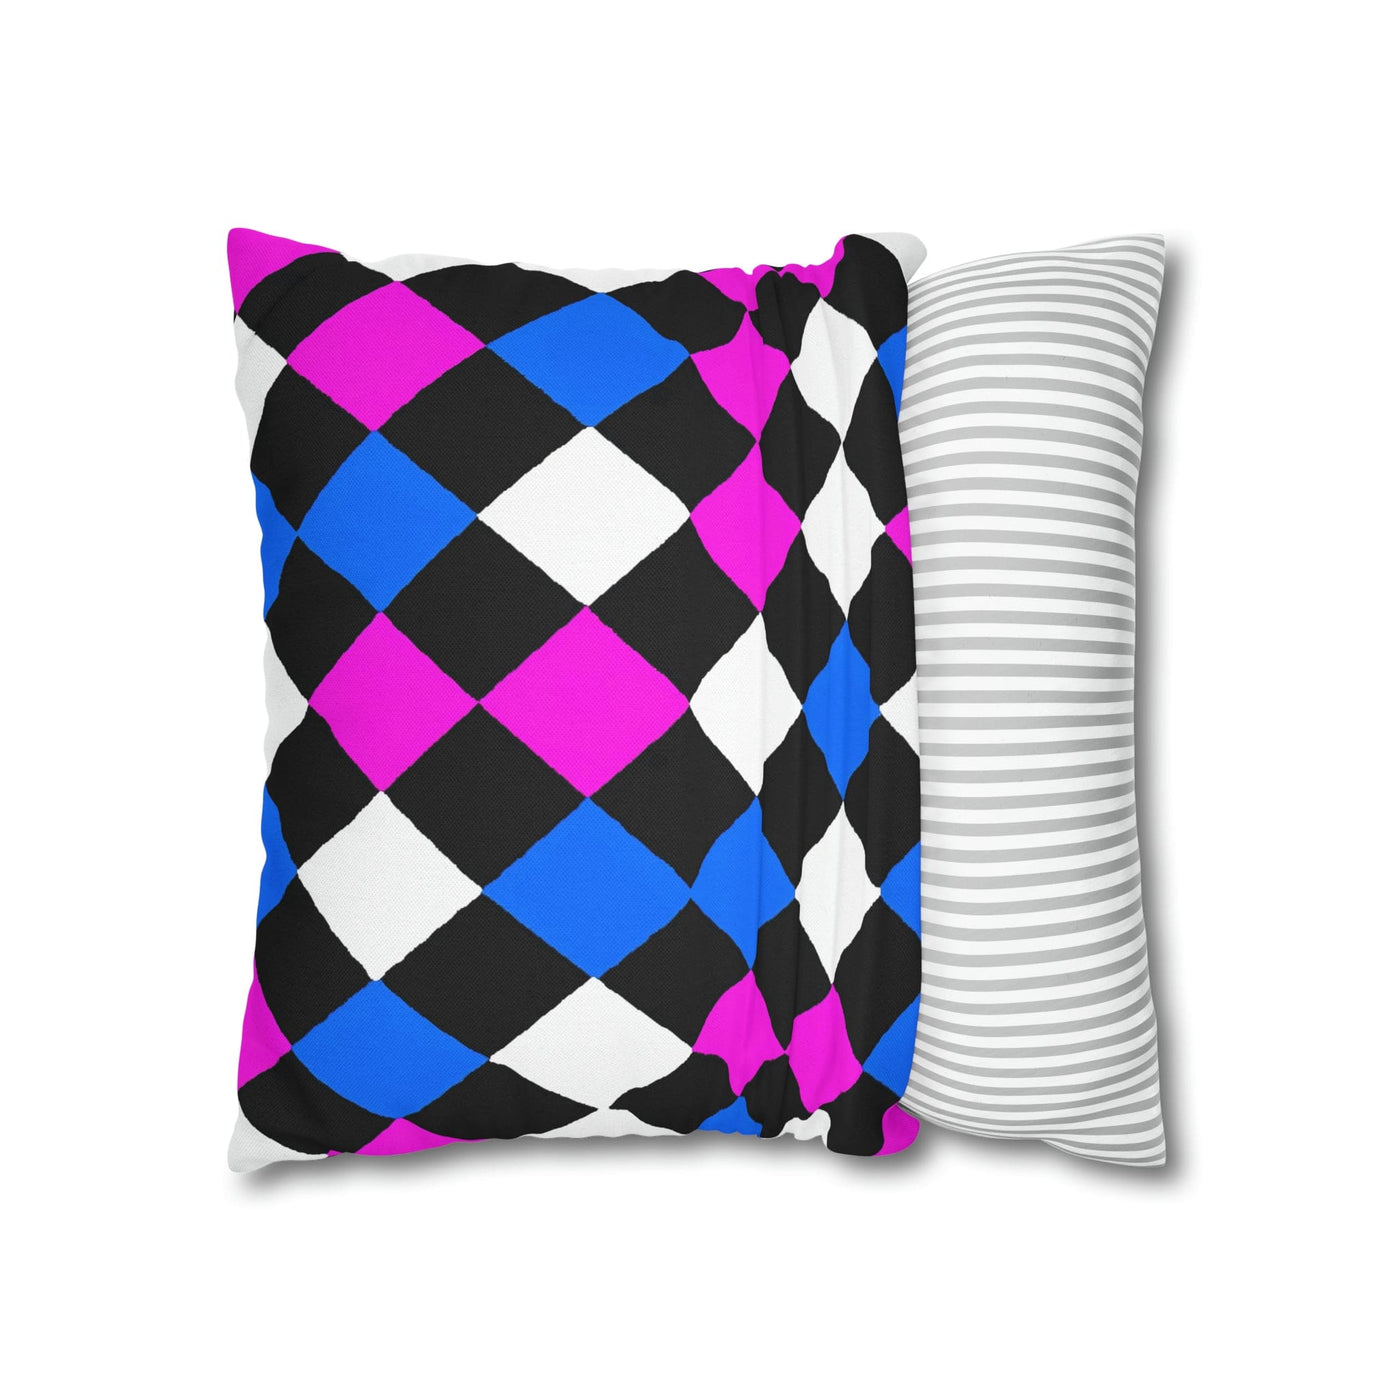 Decorative Throw Pillow Covers With Zipper - Set Of 2 Black Pink Blue Checkered